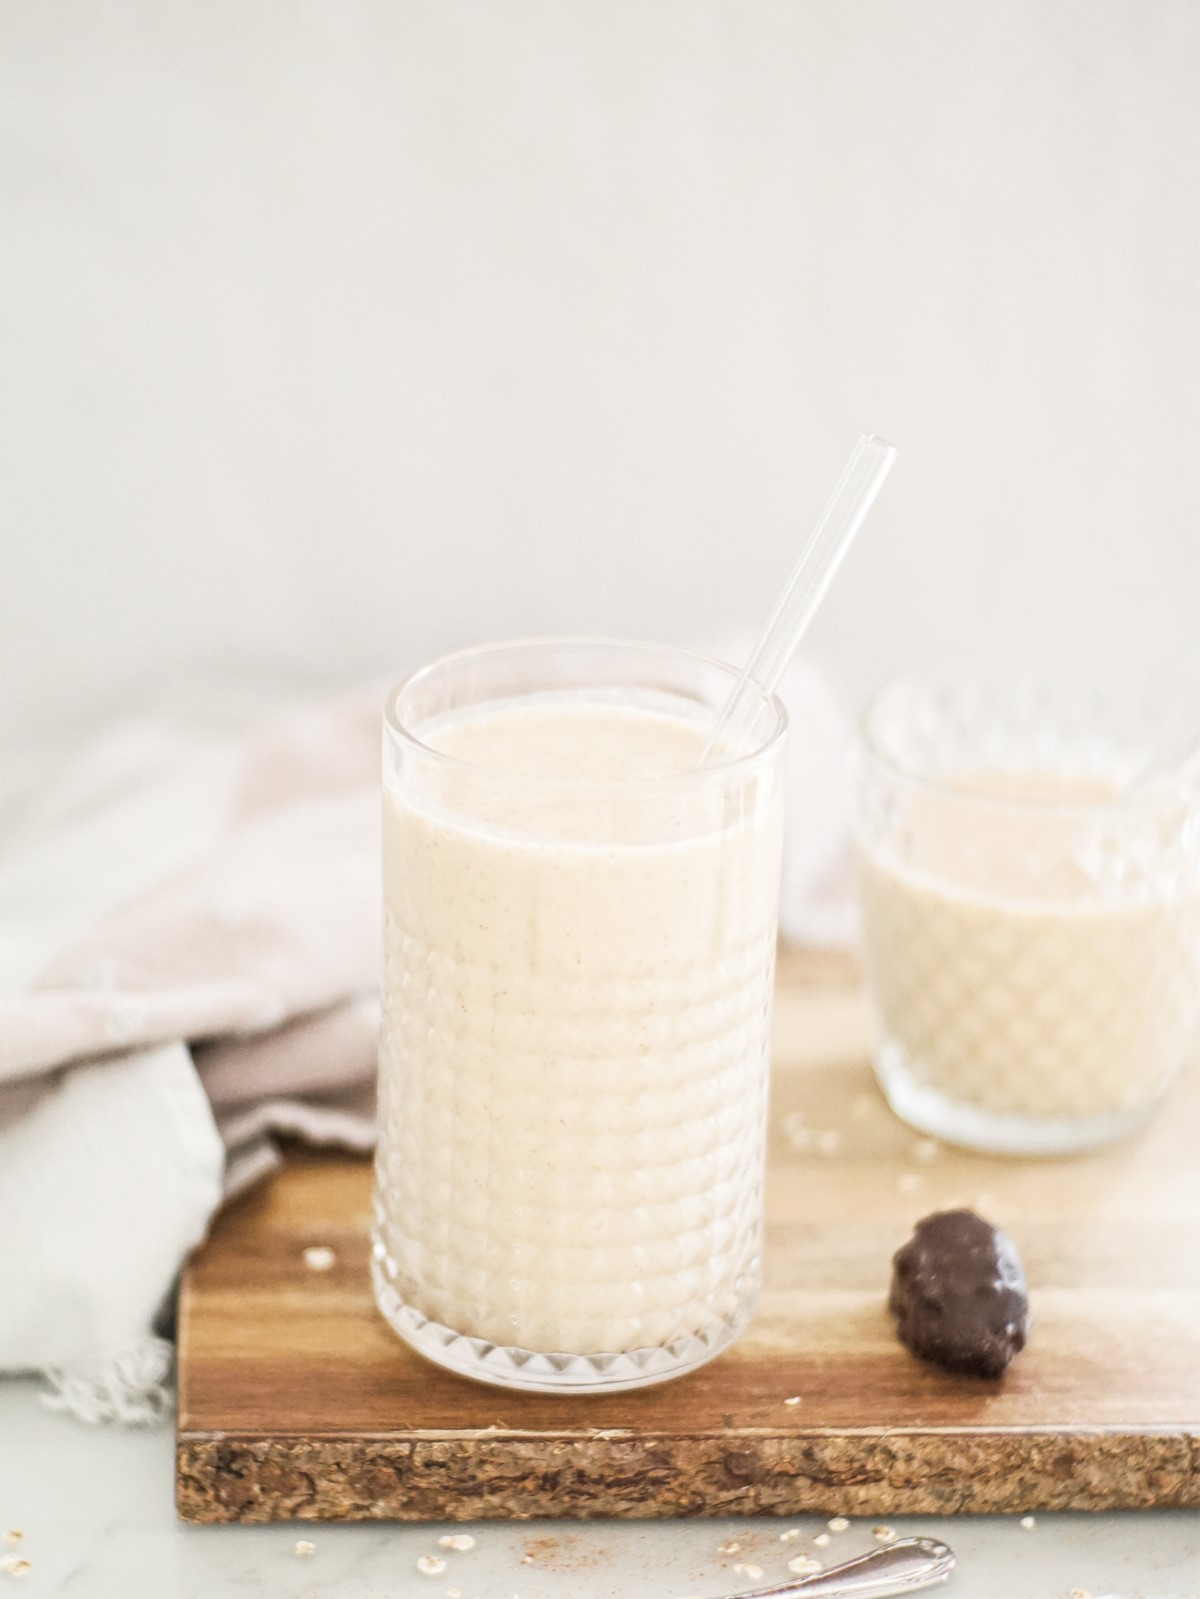 Banana Smoothie with Peanut Butter  - Title of the Recipe